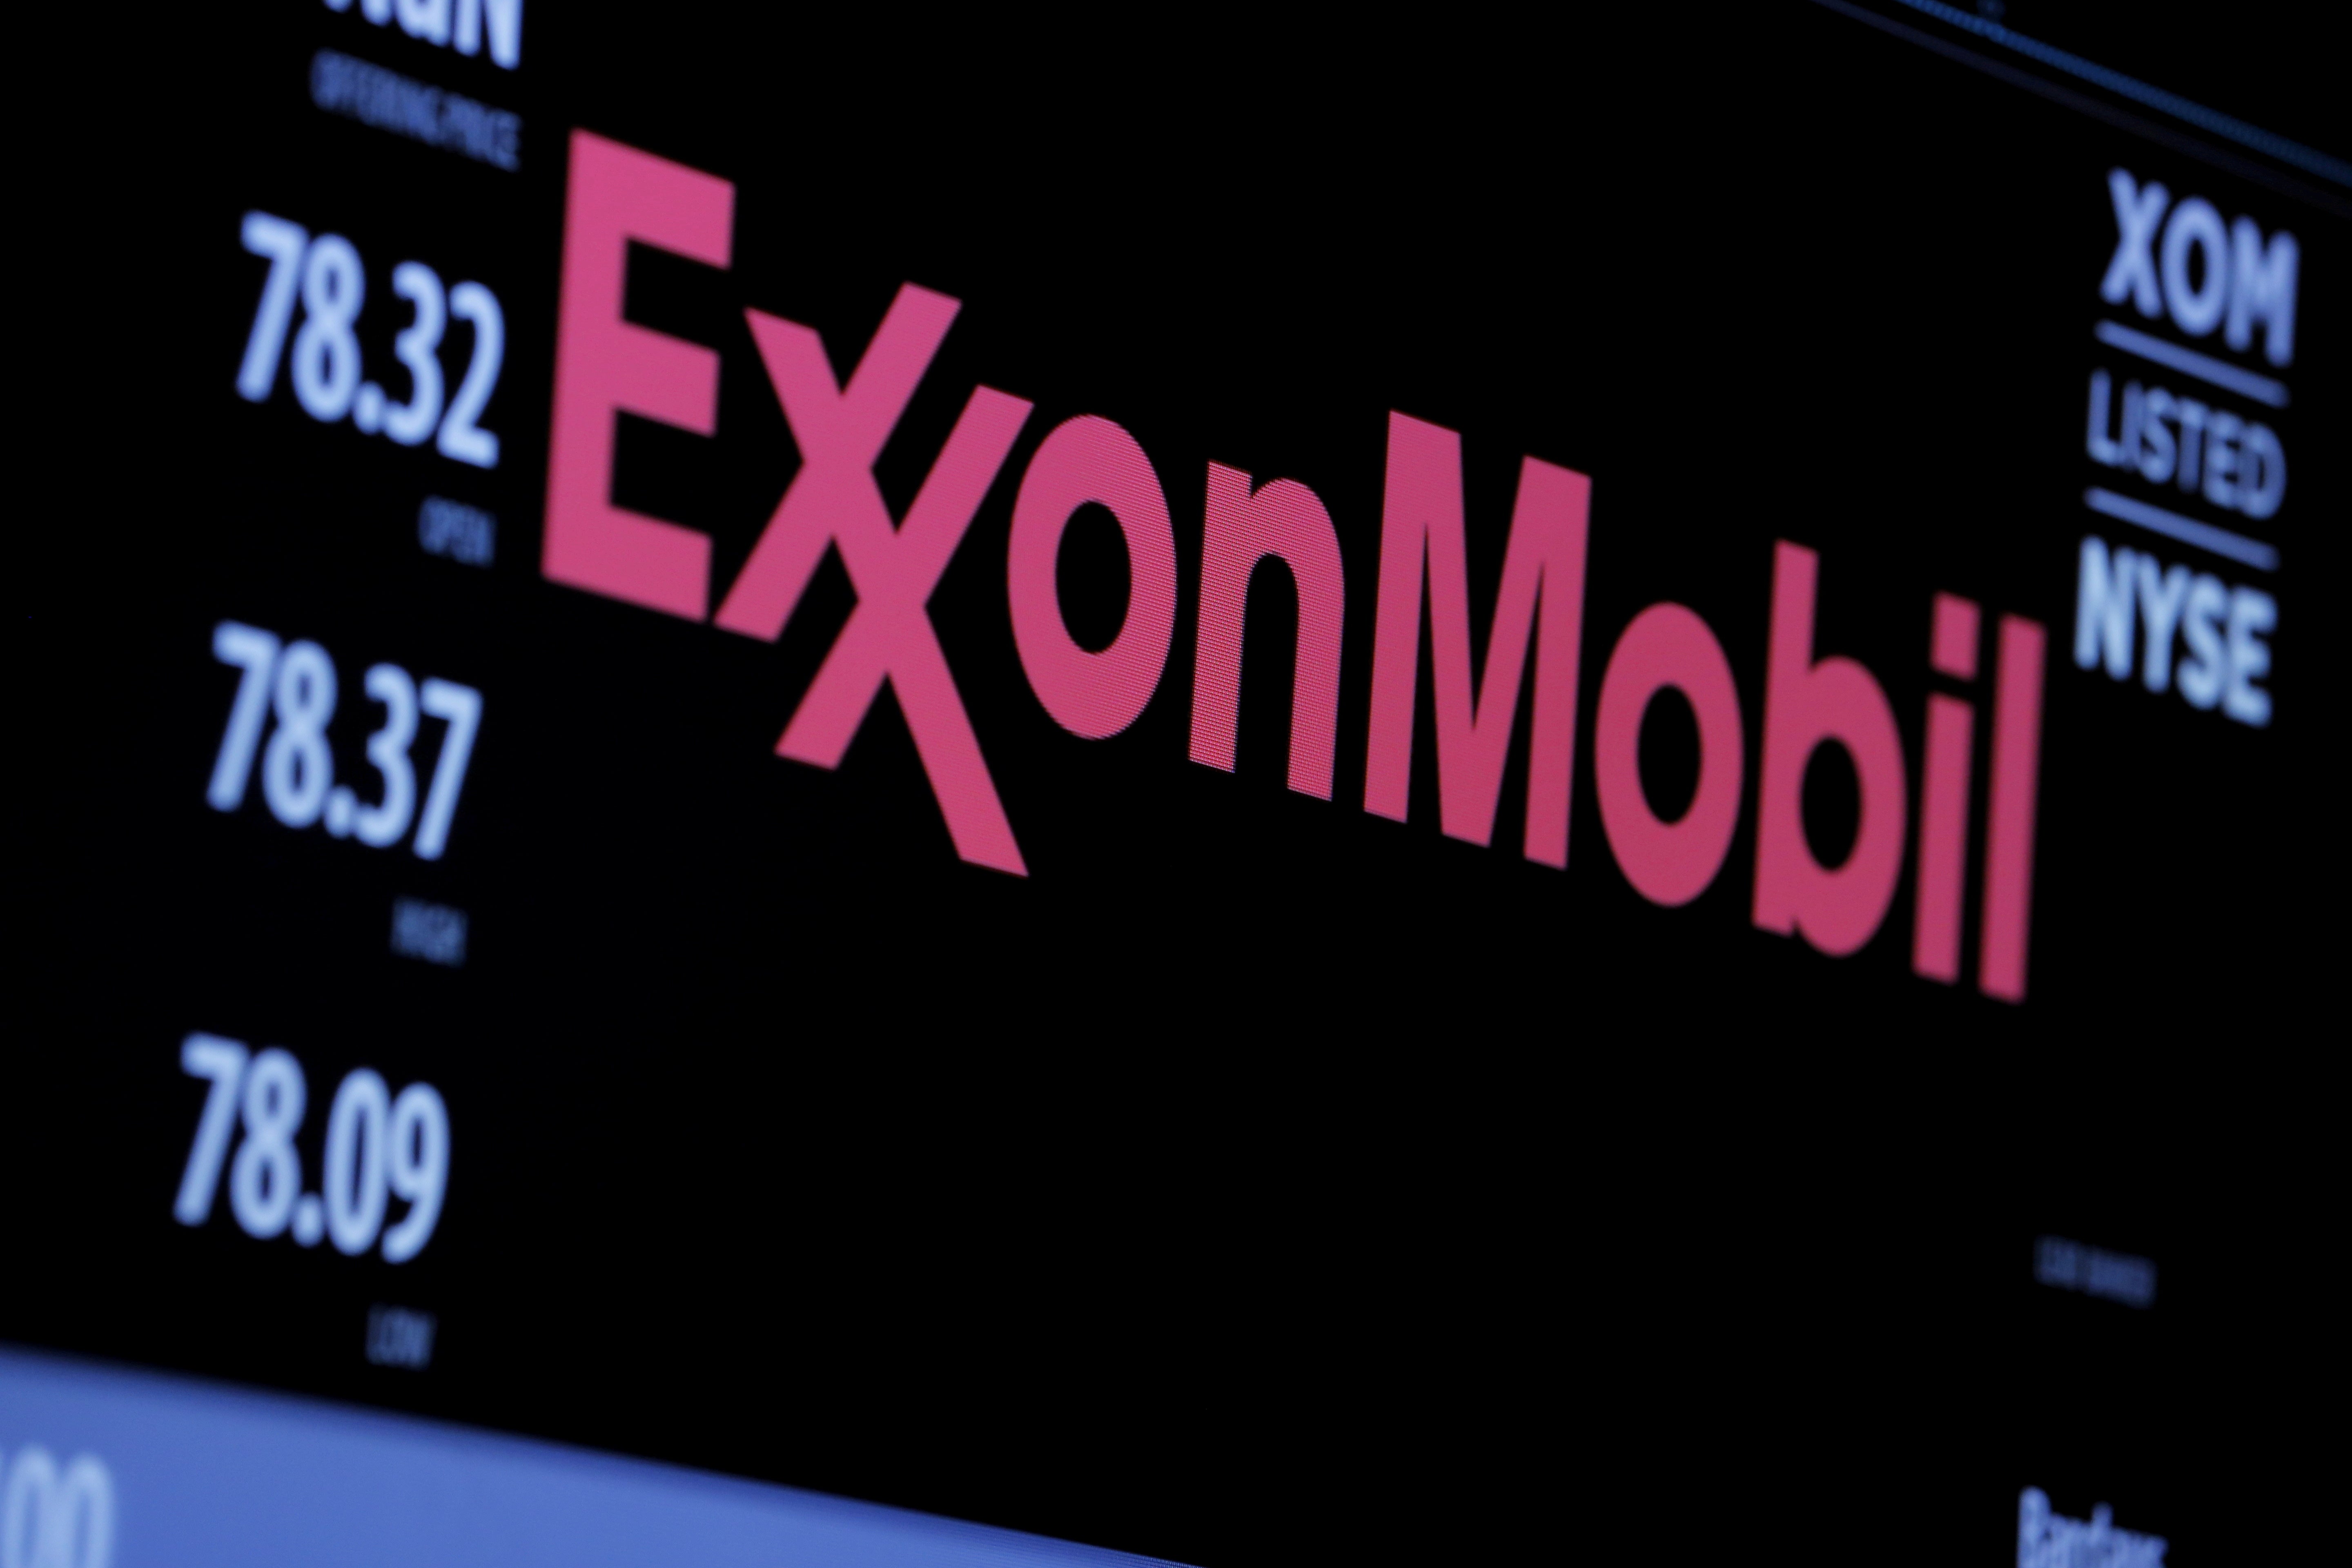 The Exxon Mobil logo is seen on the New York Stock Exchange.